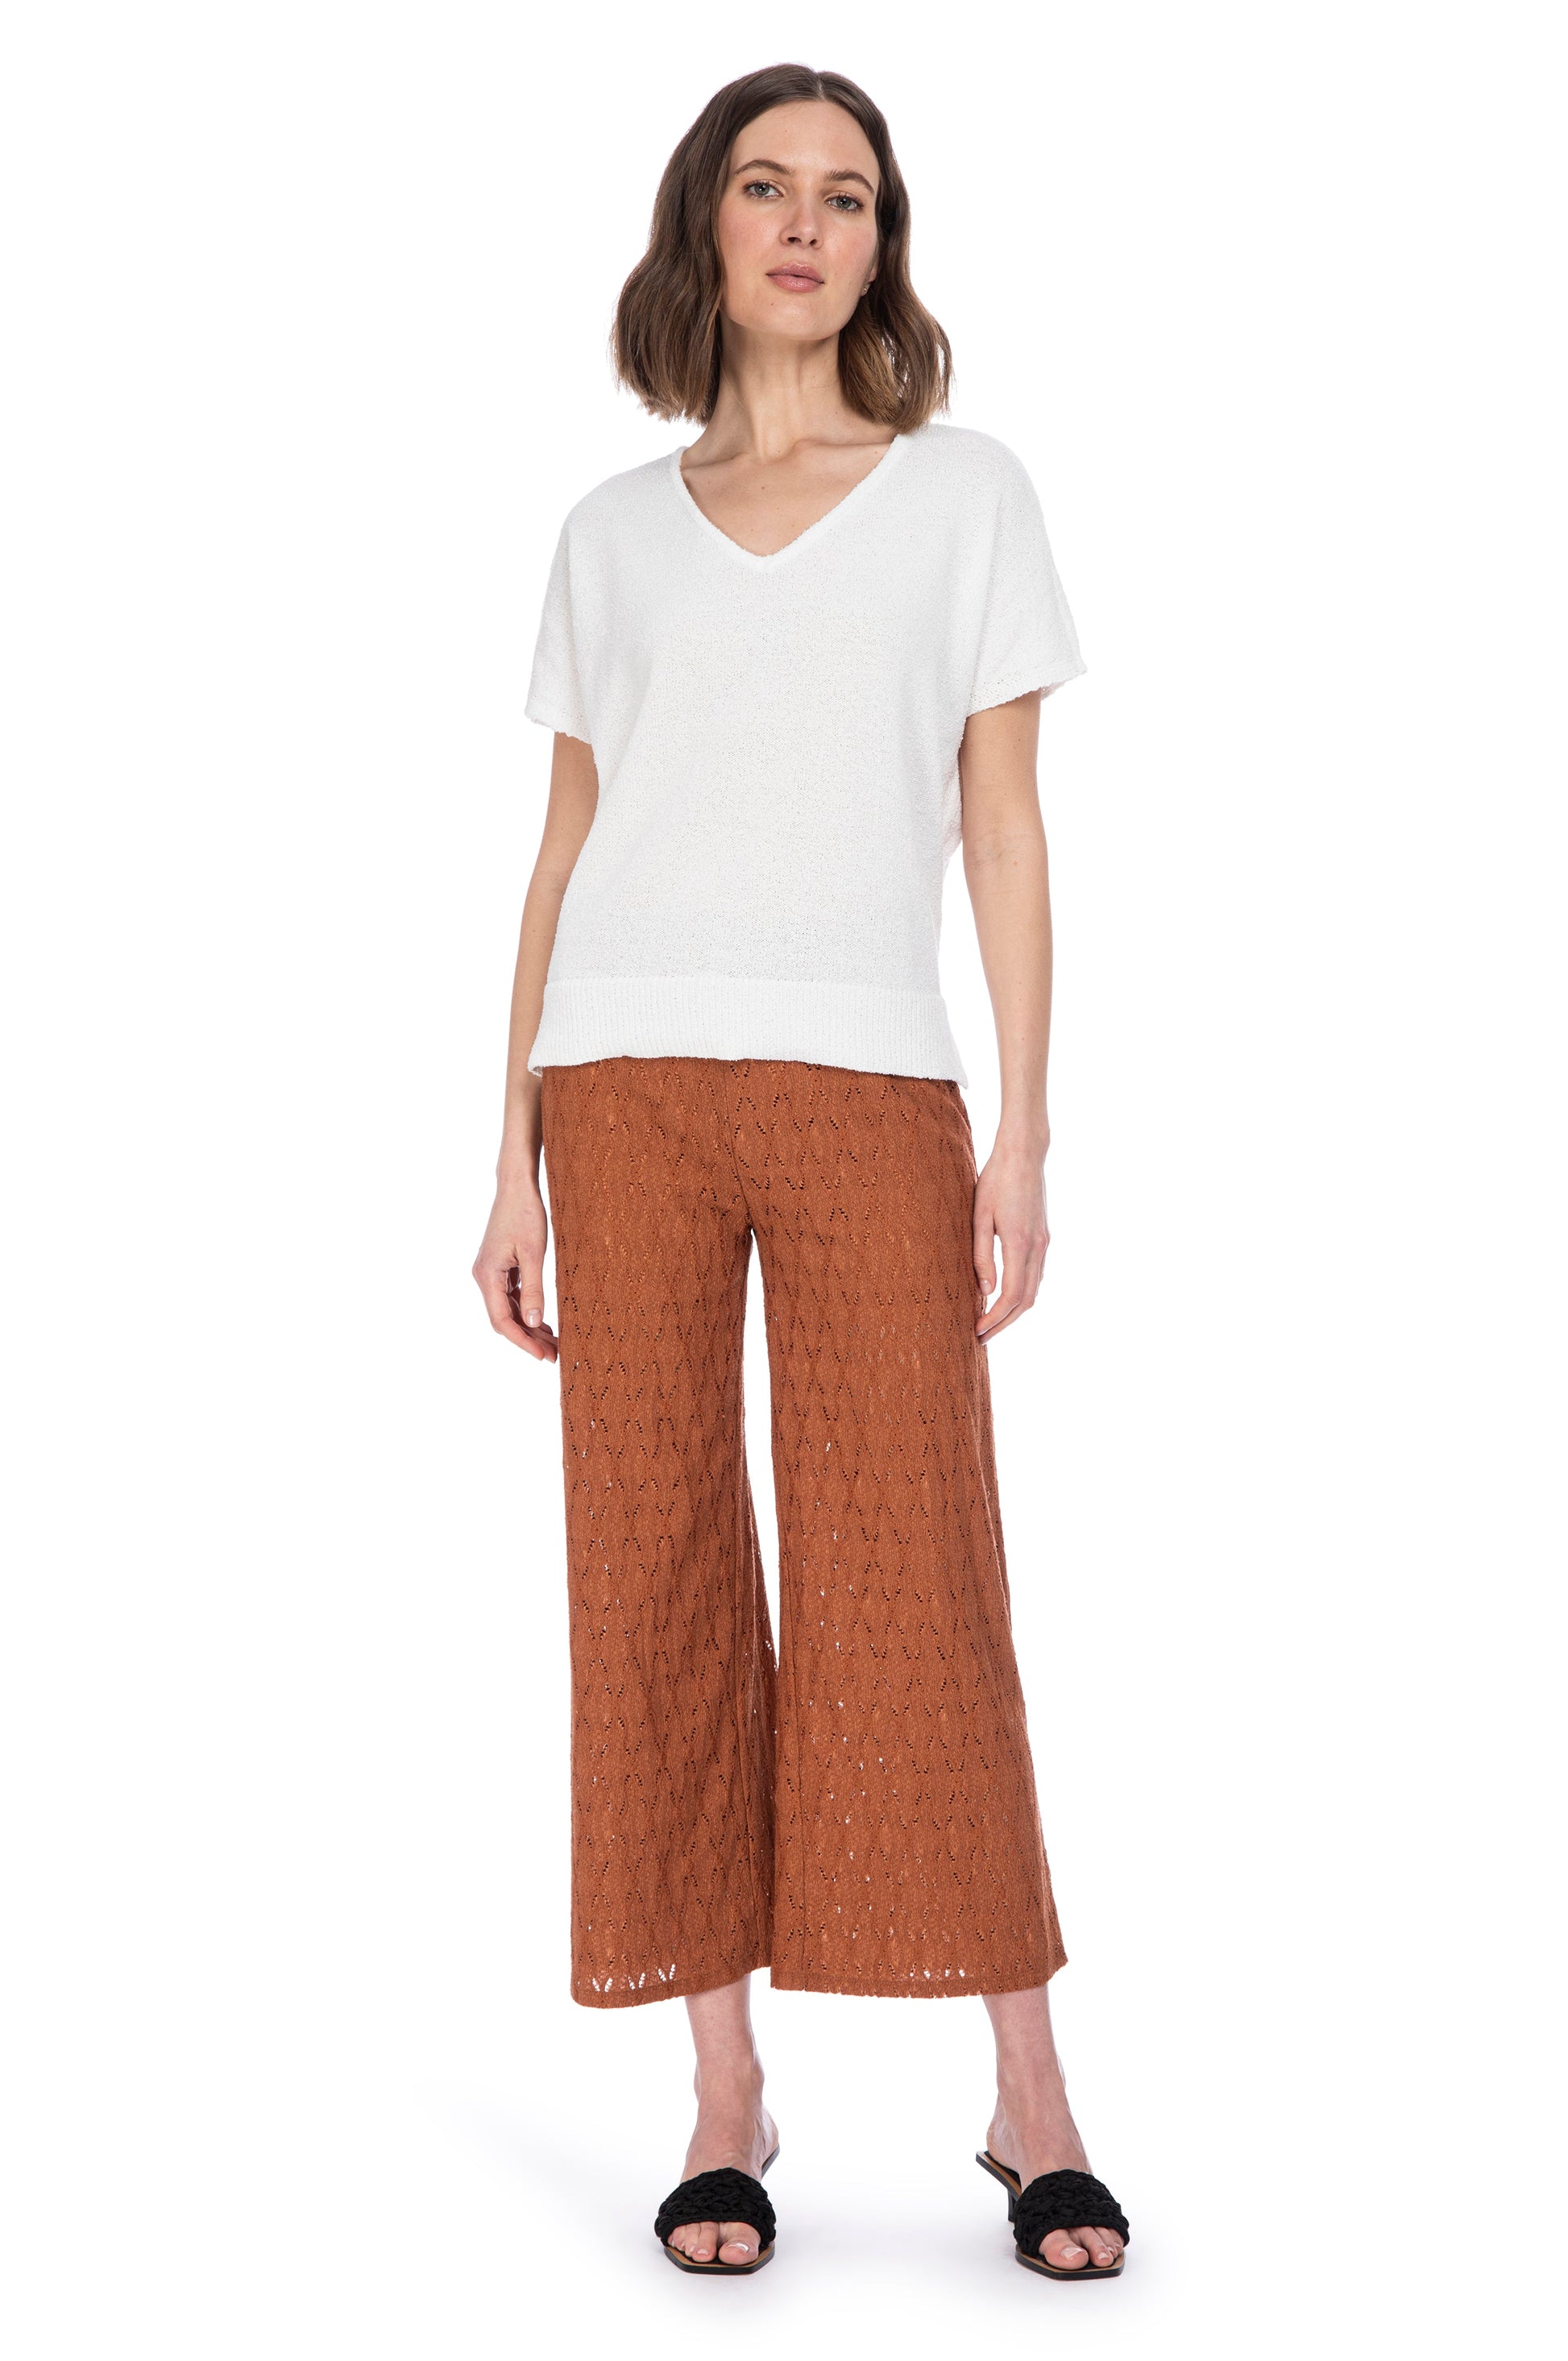 A woman stands confidently on a plain background, showcasing her fashion-forward outfit that includes white v-neck blouse paired with stylish brown lace-patterned culottes from B Collection by Bobeau, complemented by simple black open-toed sandals.